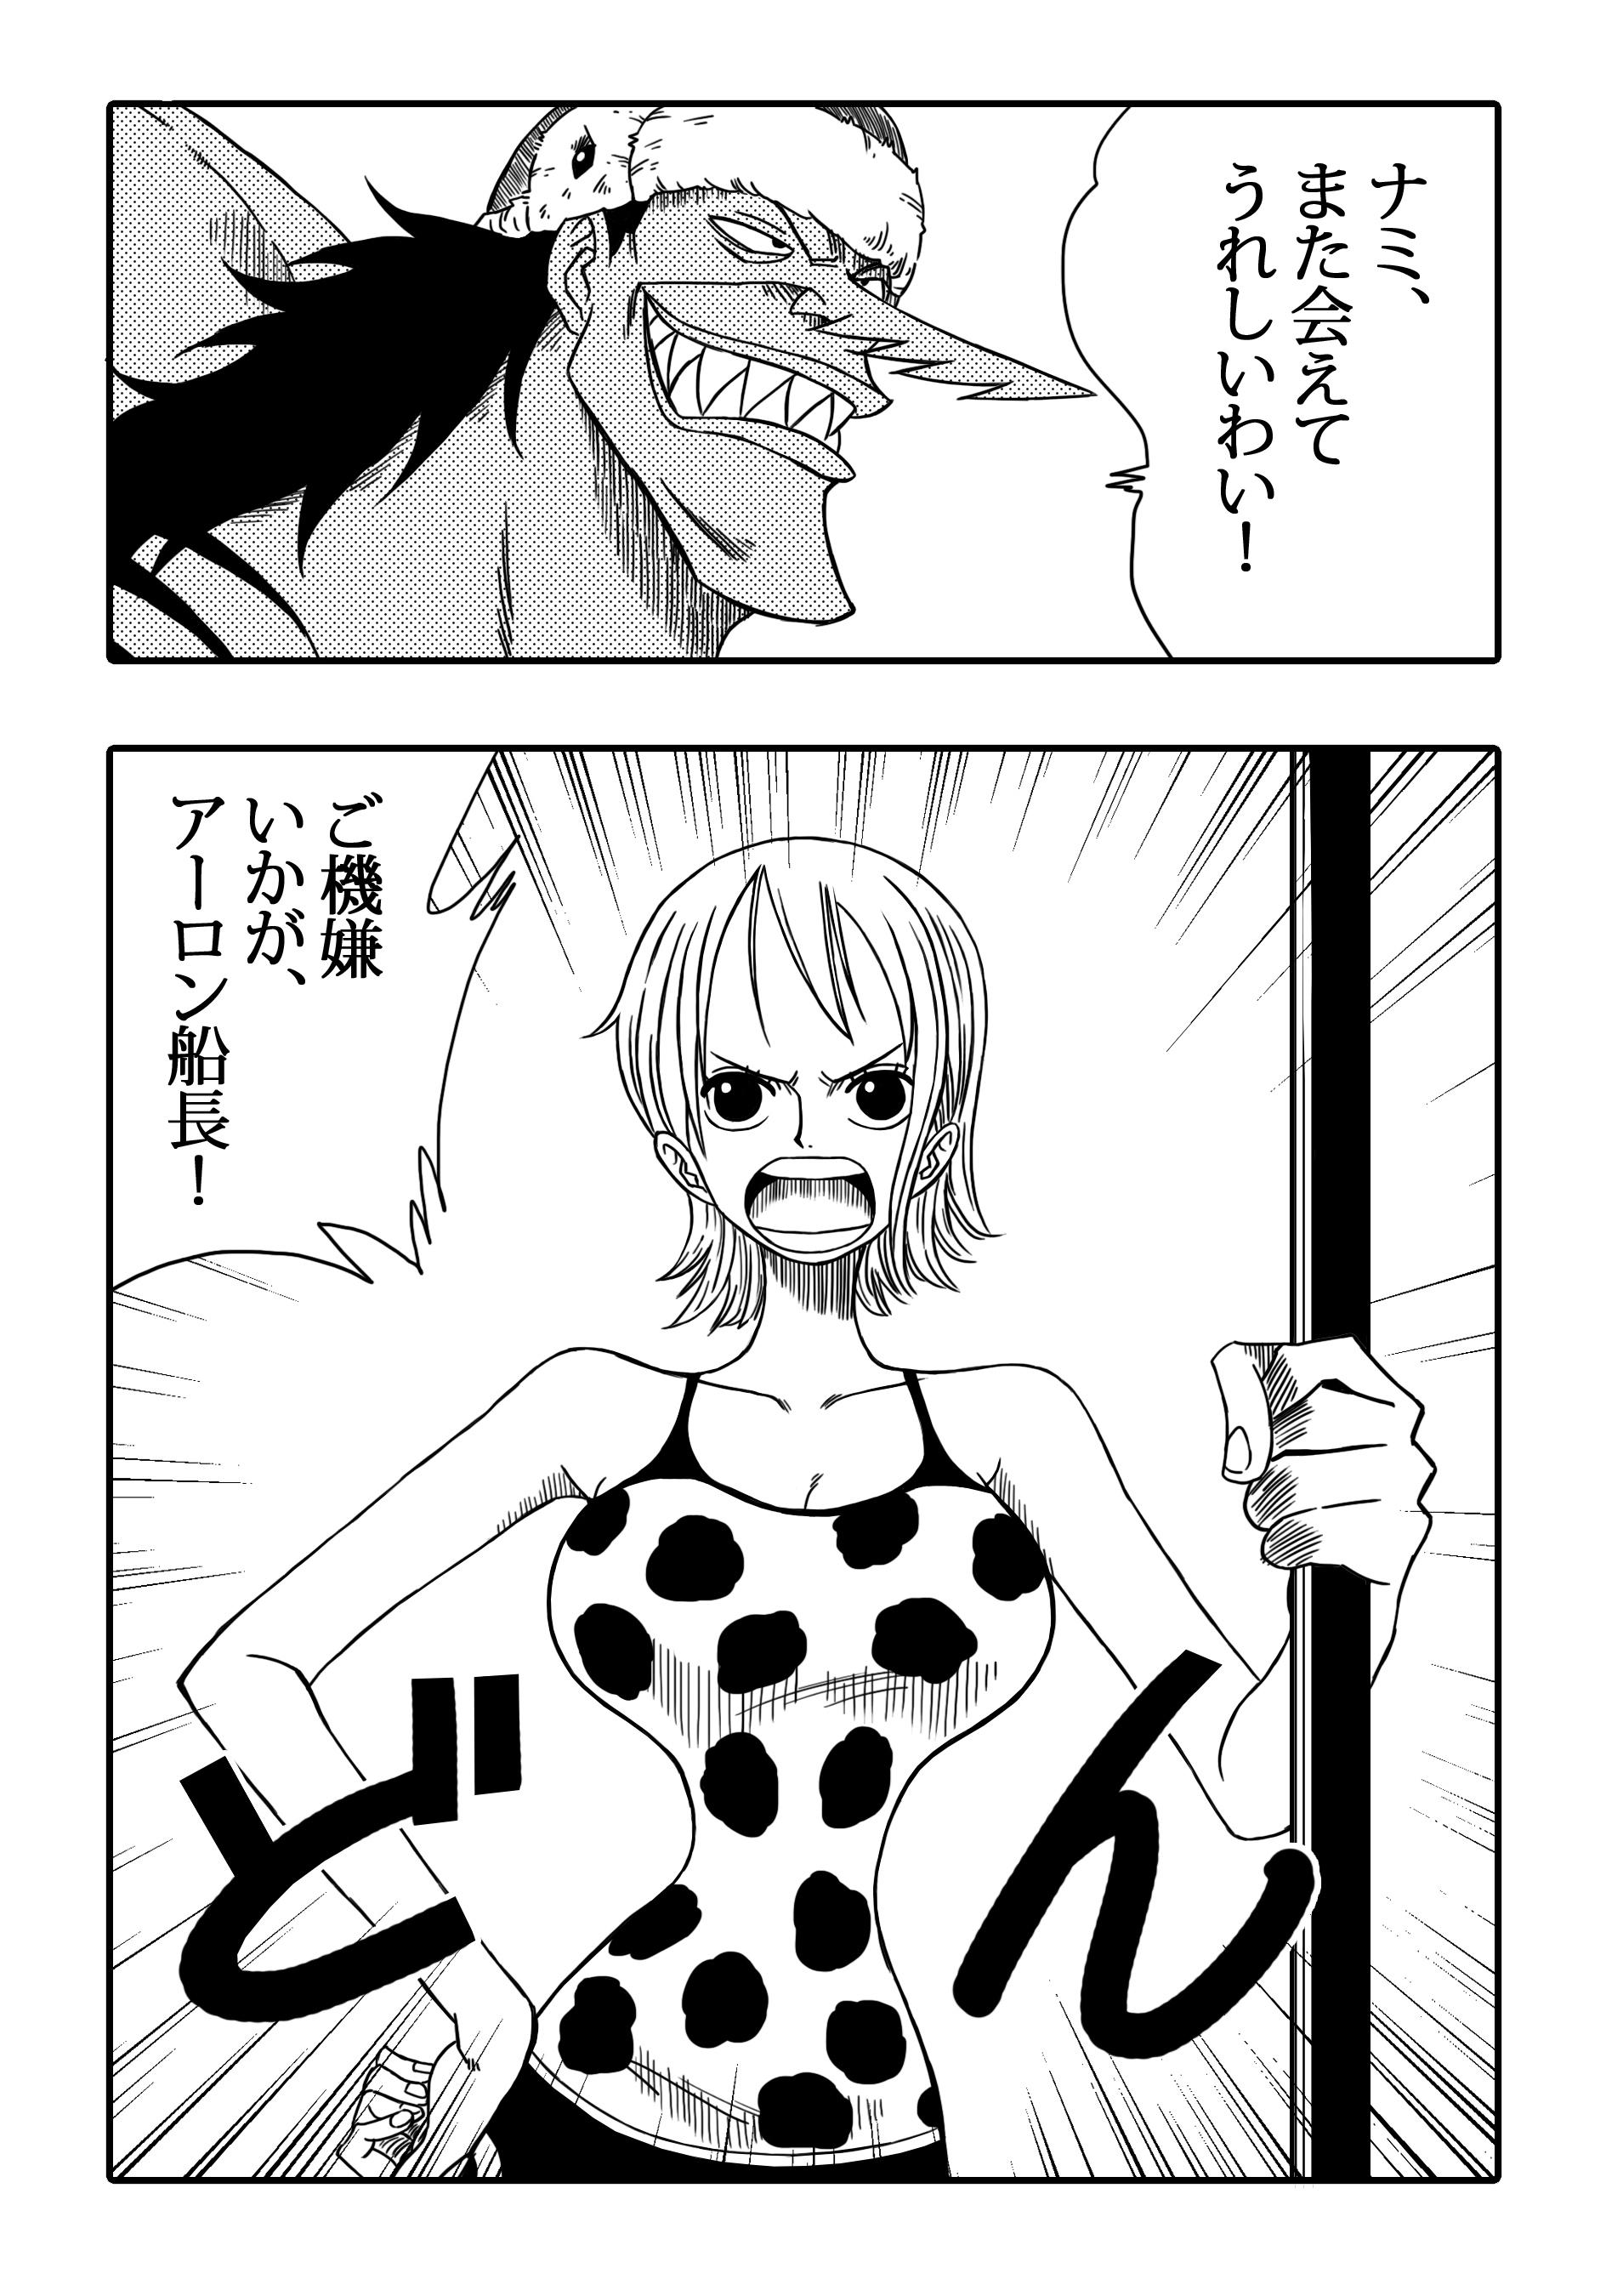 Hermosa Two Piece - Nami vs Arlong - One piece Nudity - Page 3